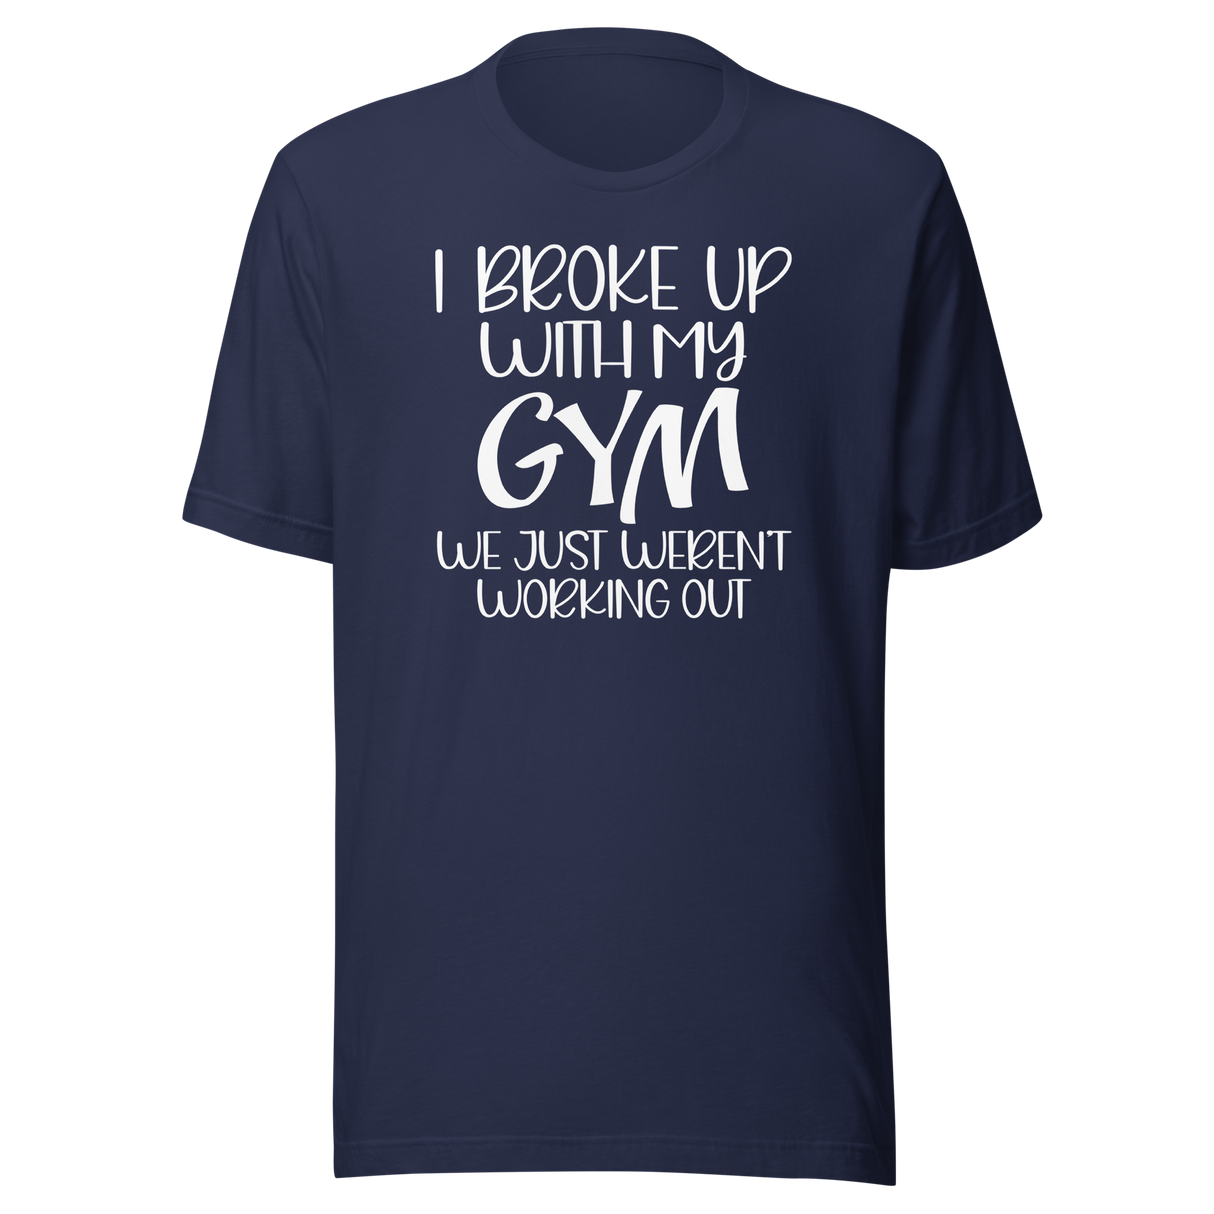 I Broke Up With My Gym We Just Weren't Working Out - Fitness Tee - Funny T-Shirt - Fitness Tee - Humor T-Shirt - Quirky Tee